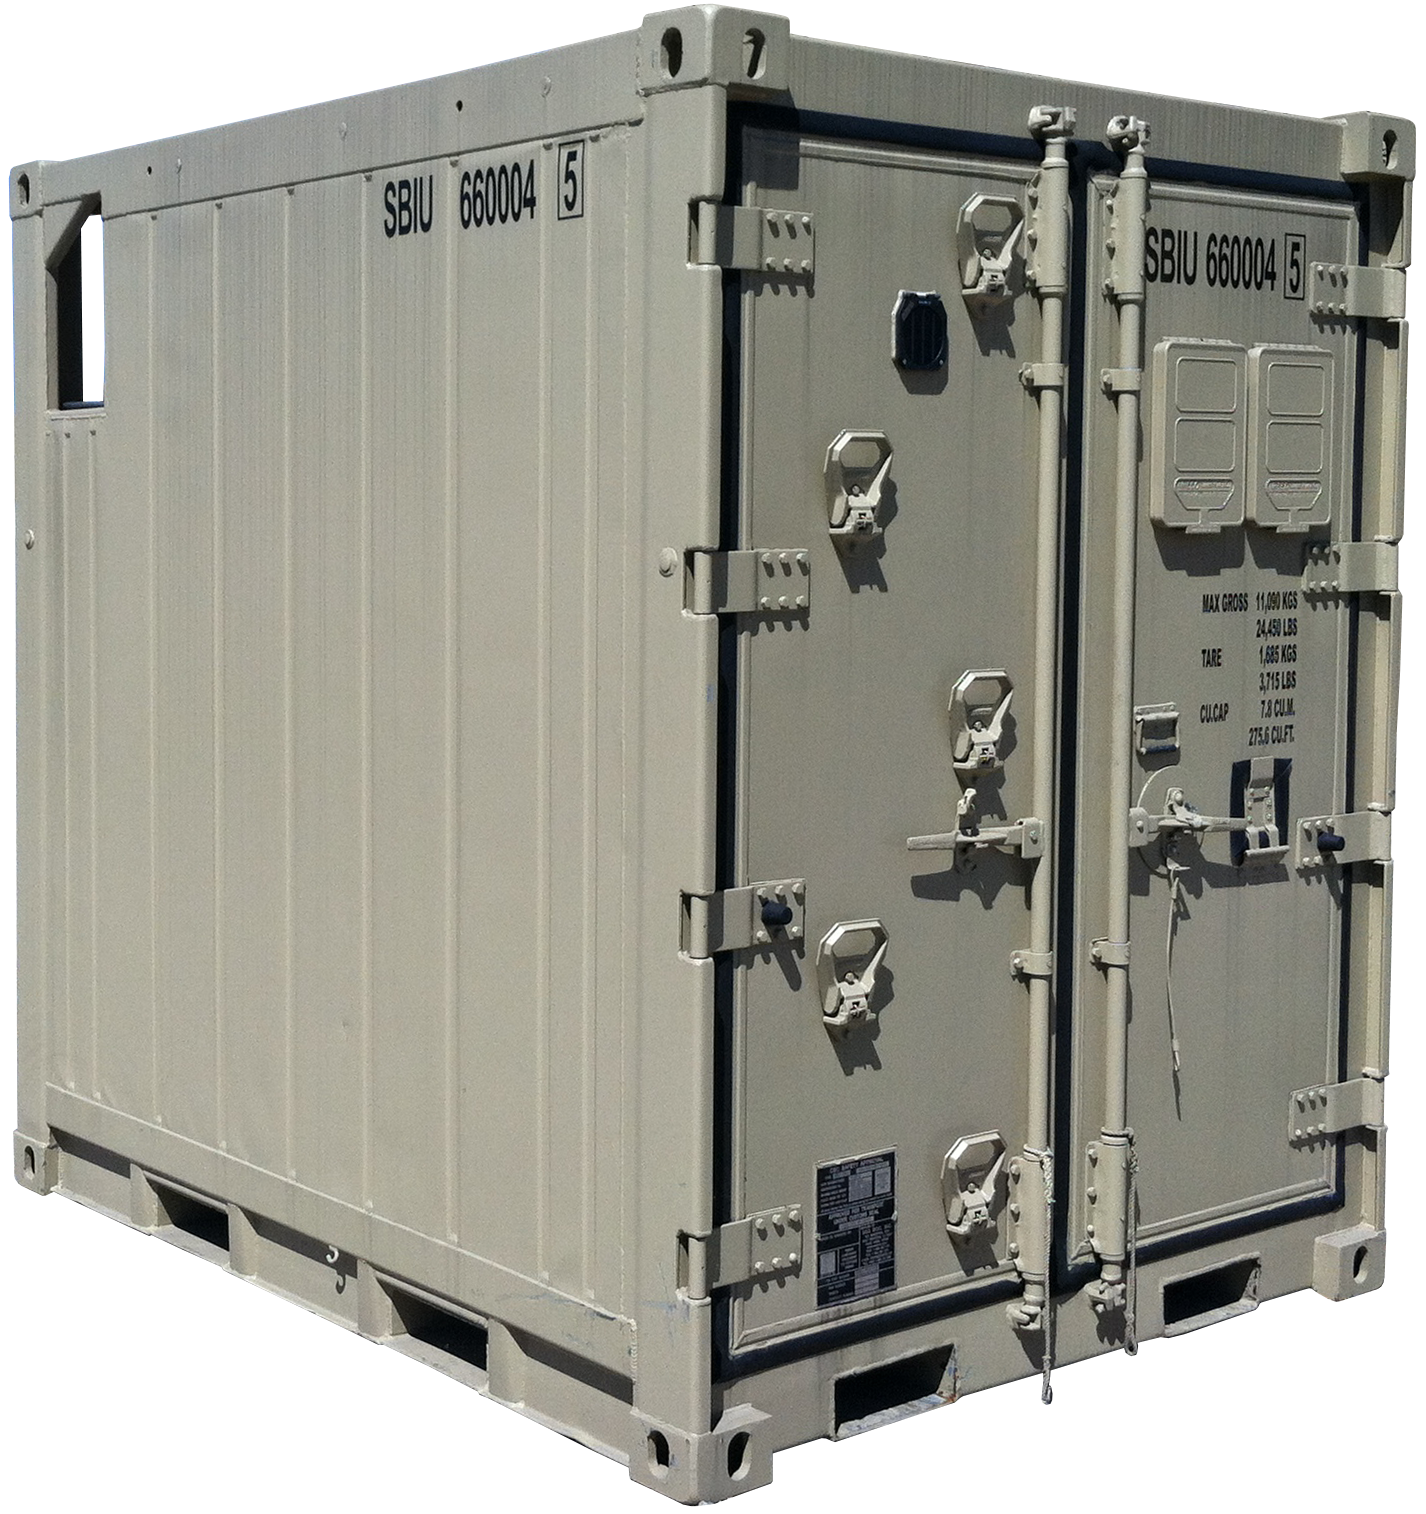 Tricon Refrigerated Cargo Container Type 1 - MRU Reefer Unit